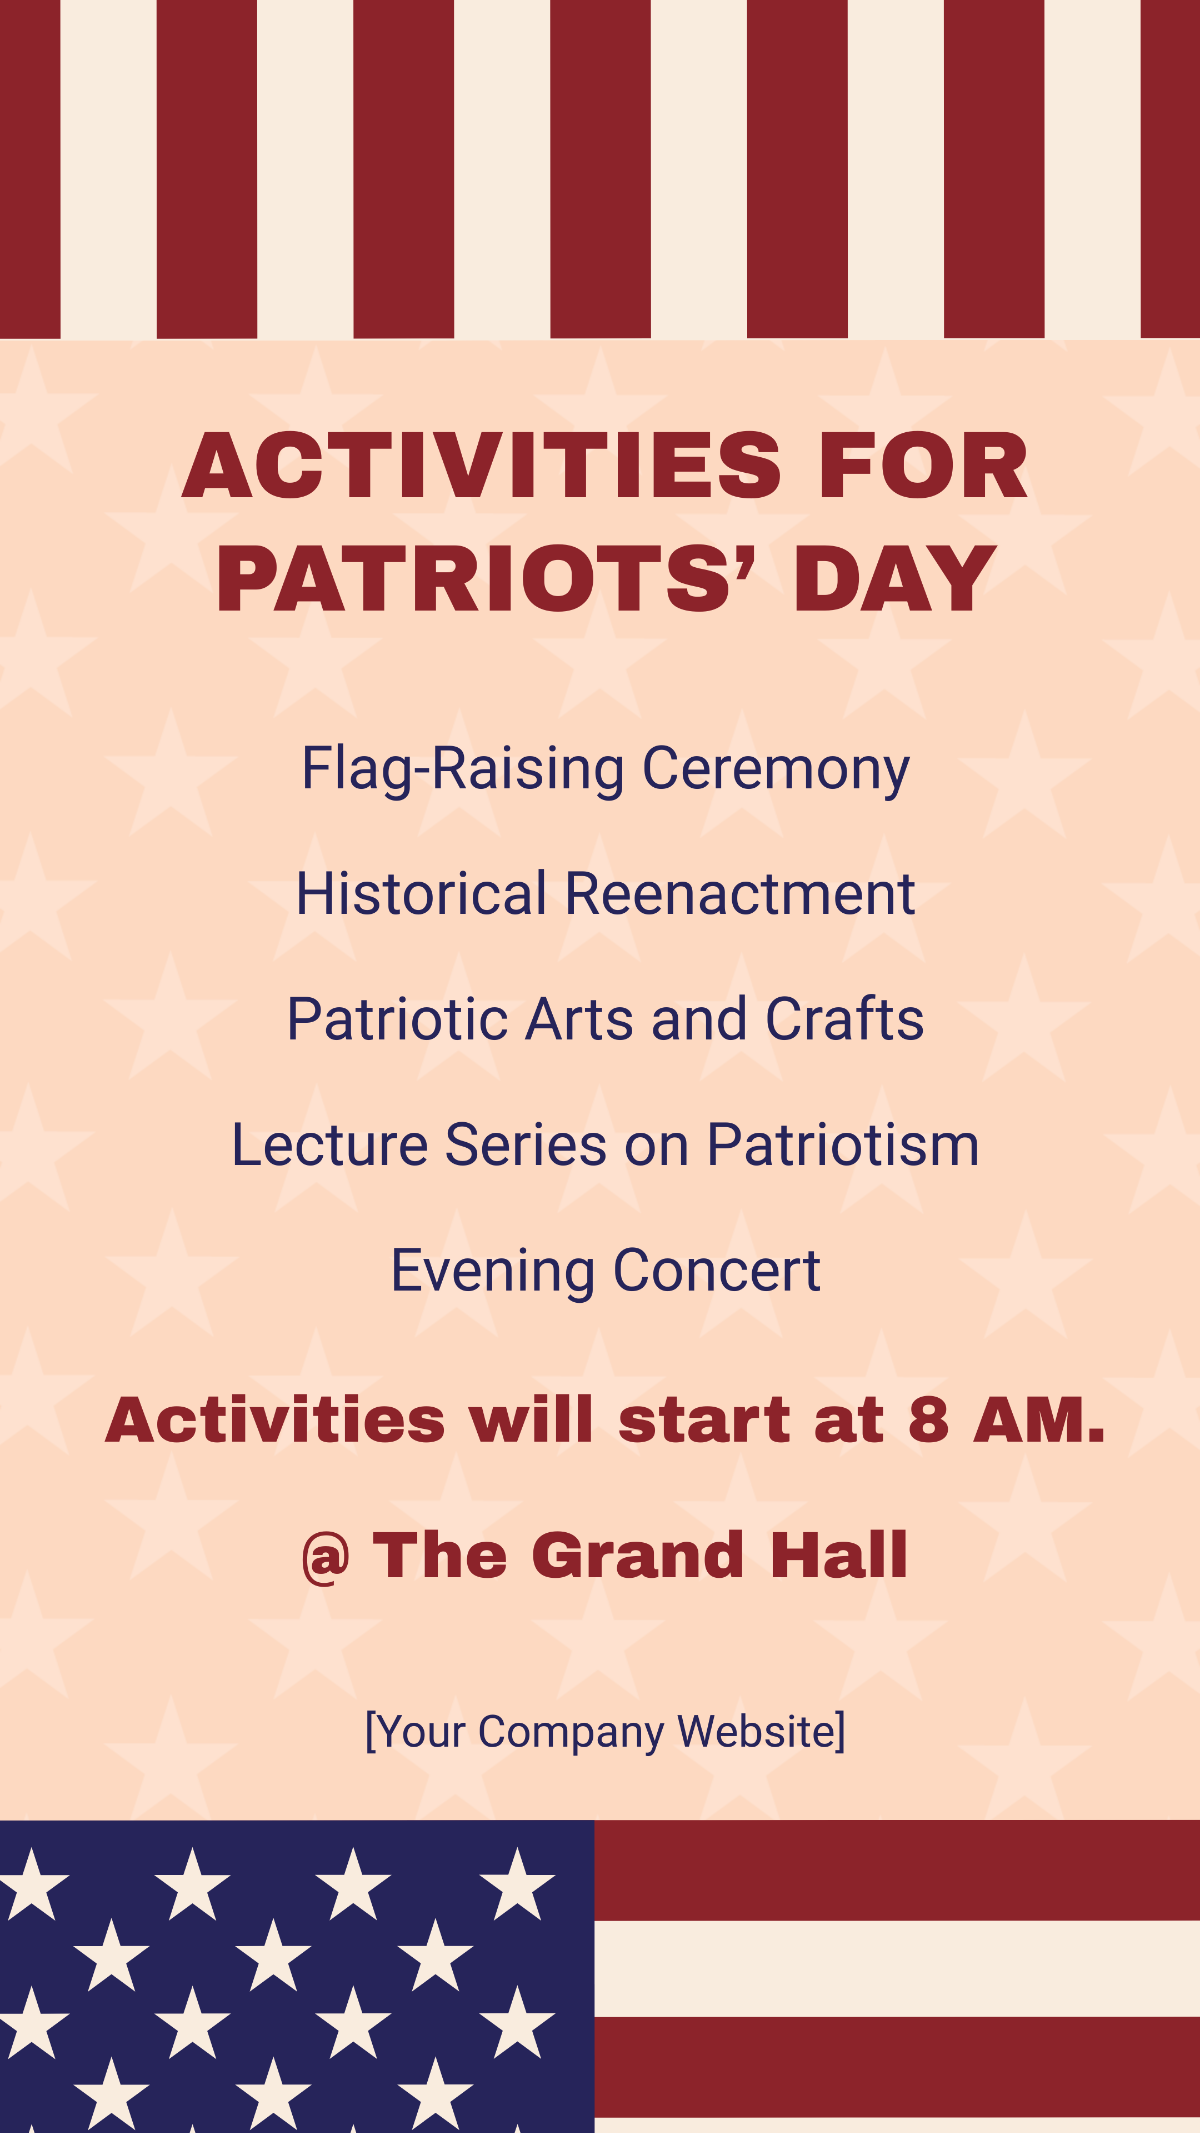 Free Patriots Day Activities Template